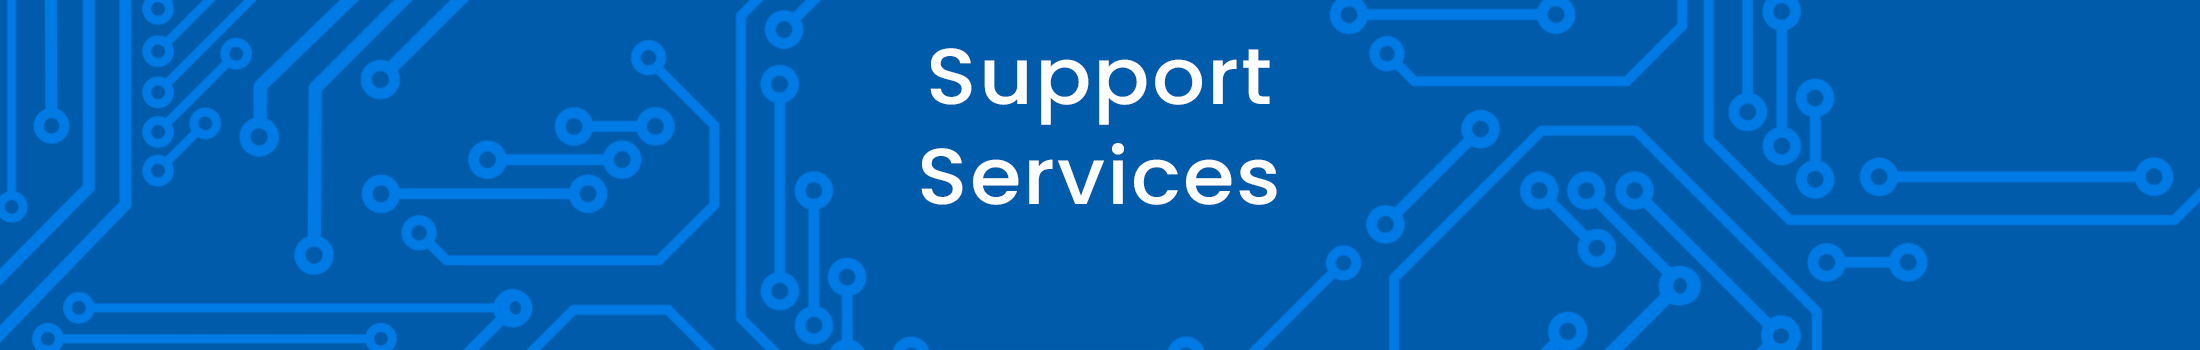 support-services-1